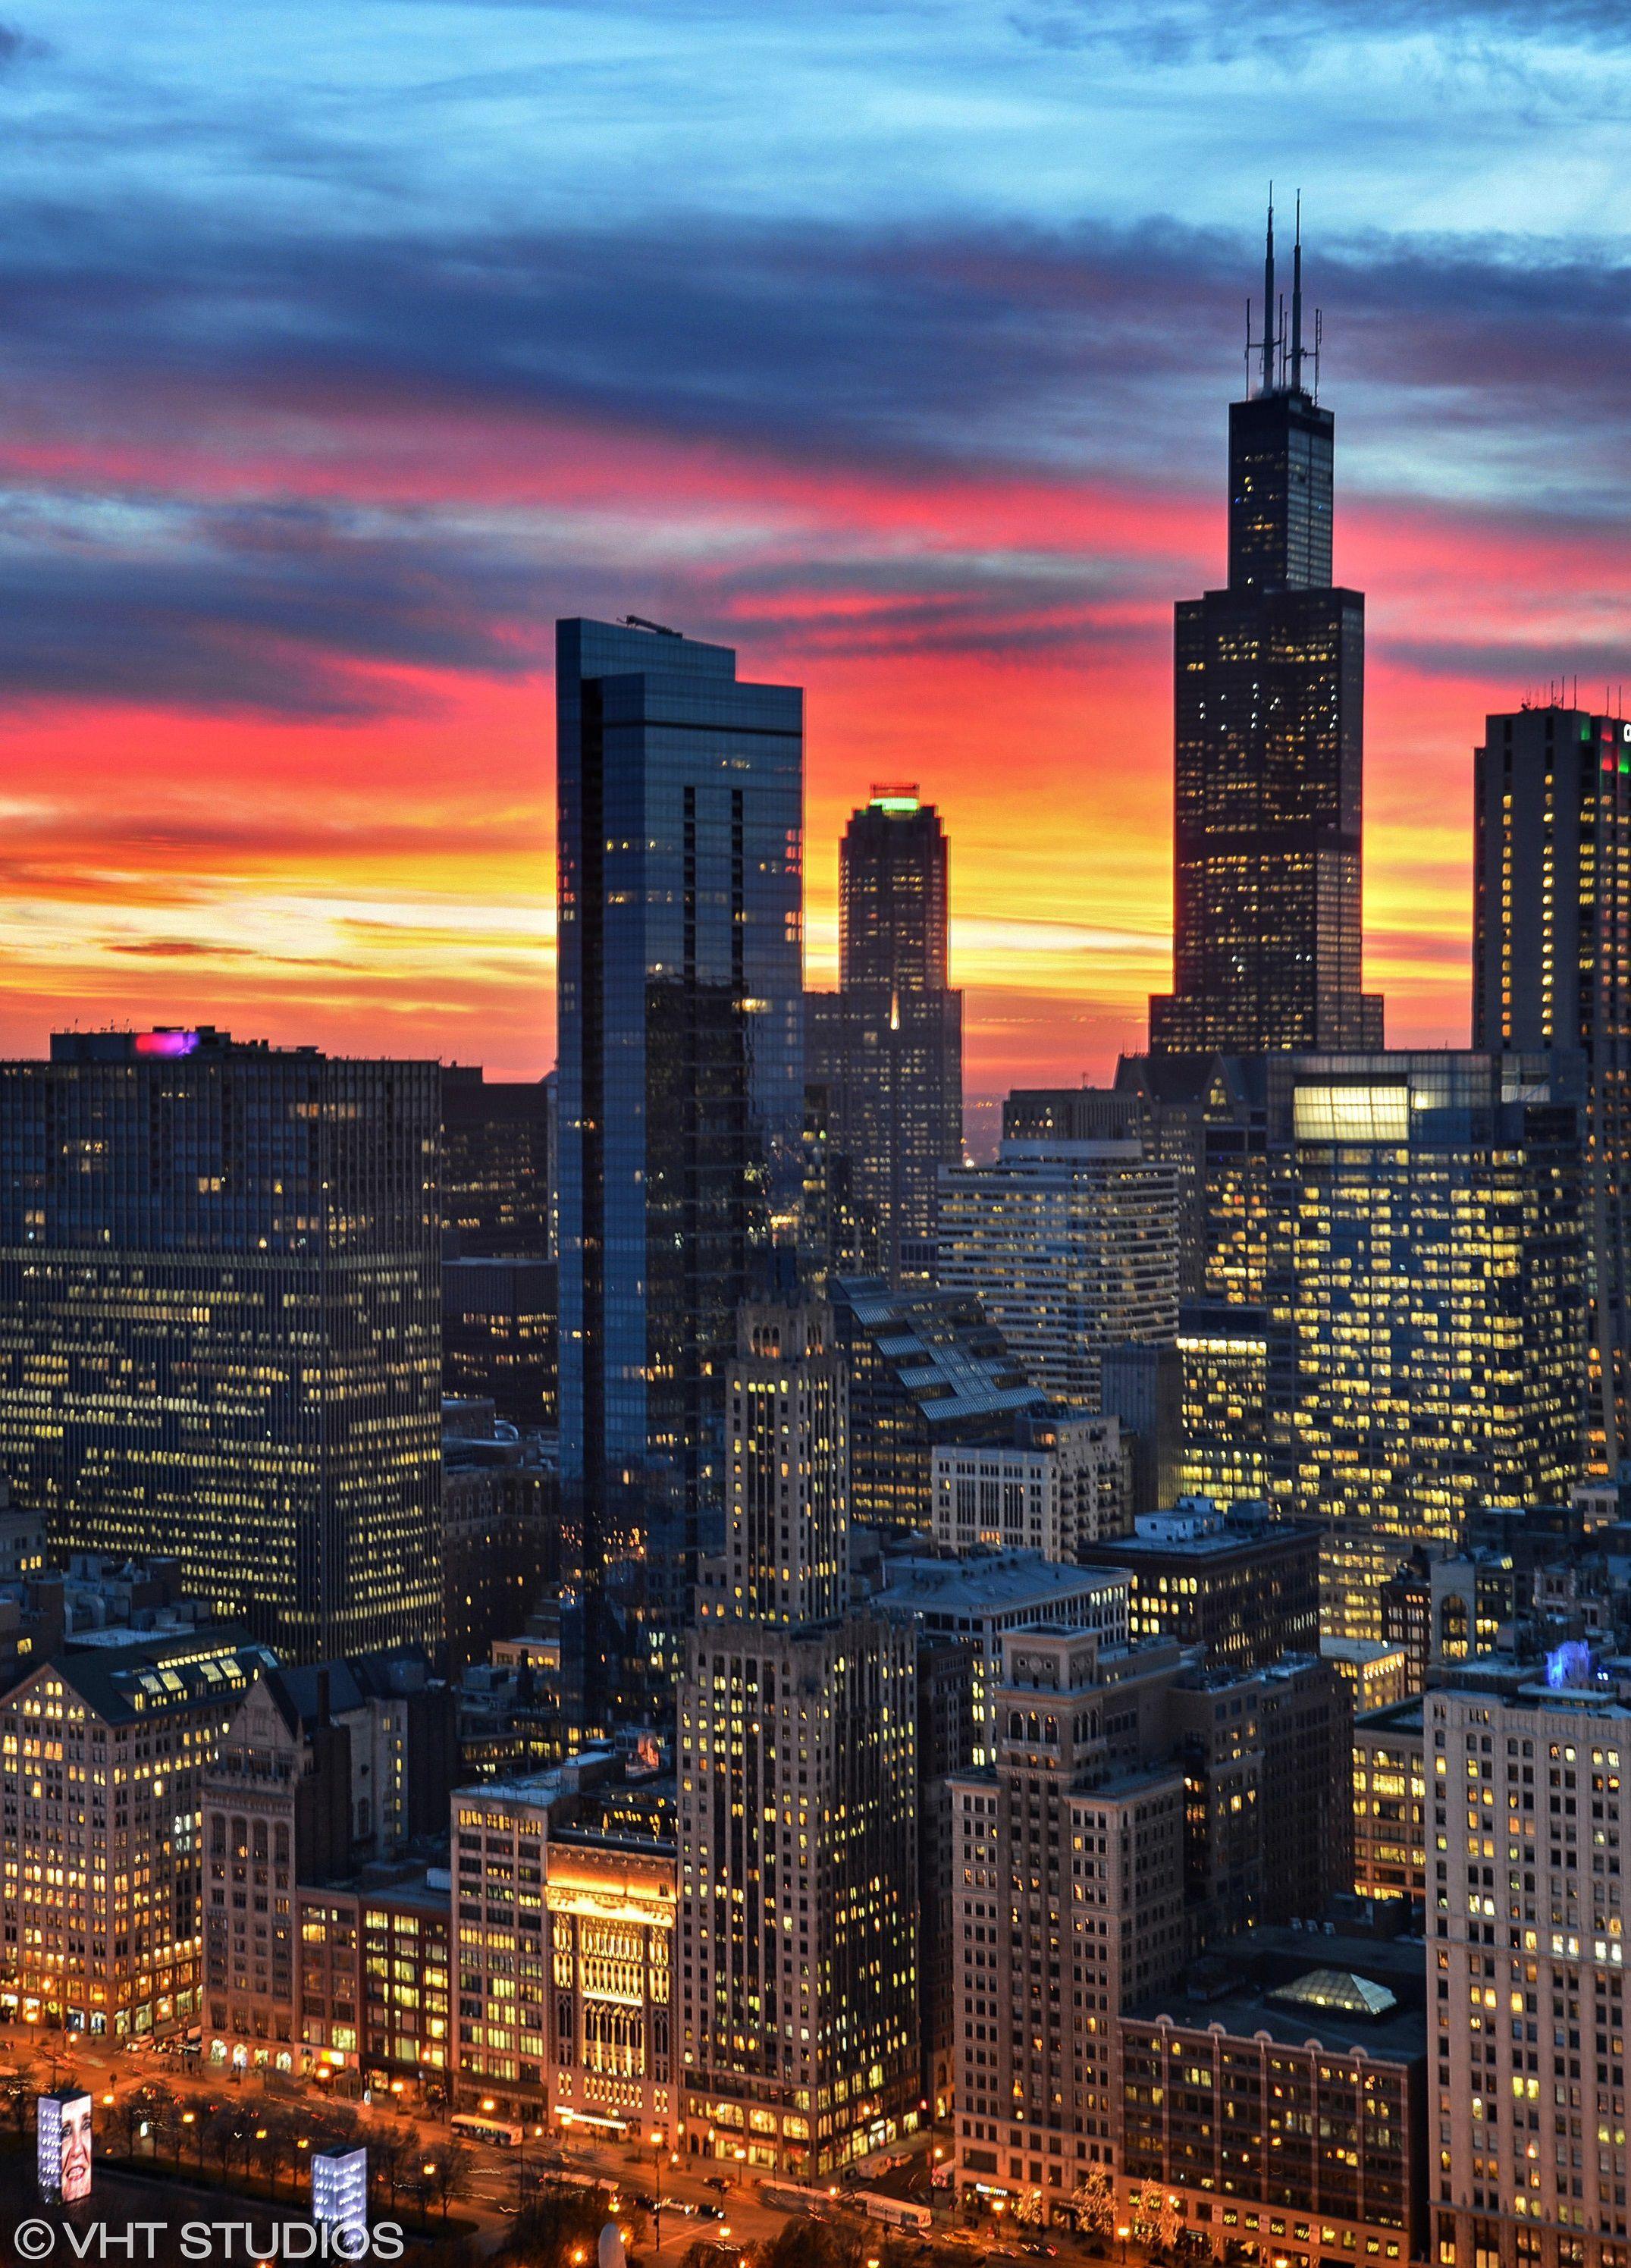 Gorgeous shot of Chicago captured by VHT photographer Rick Knoell